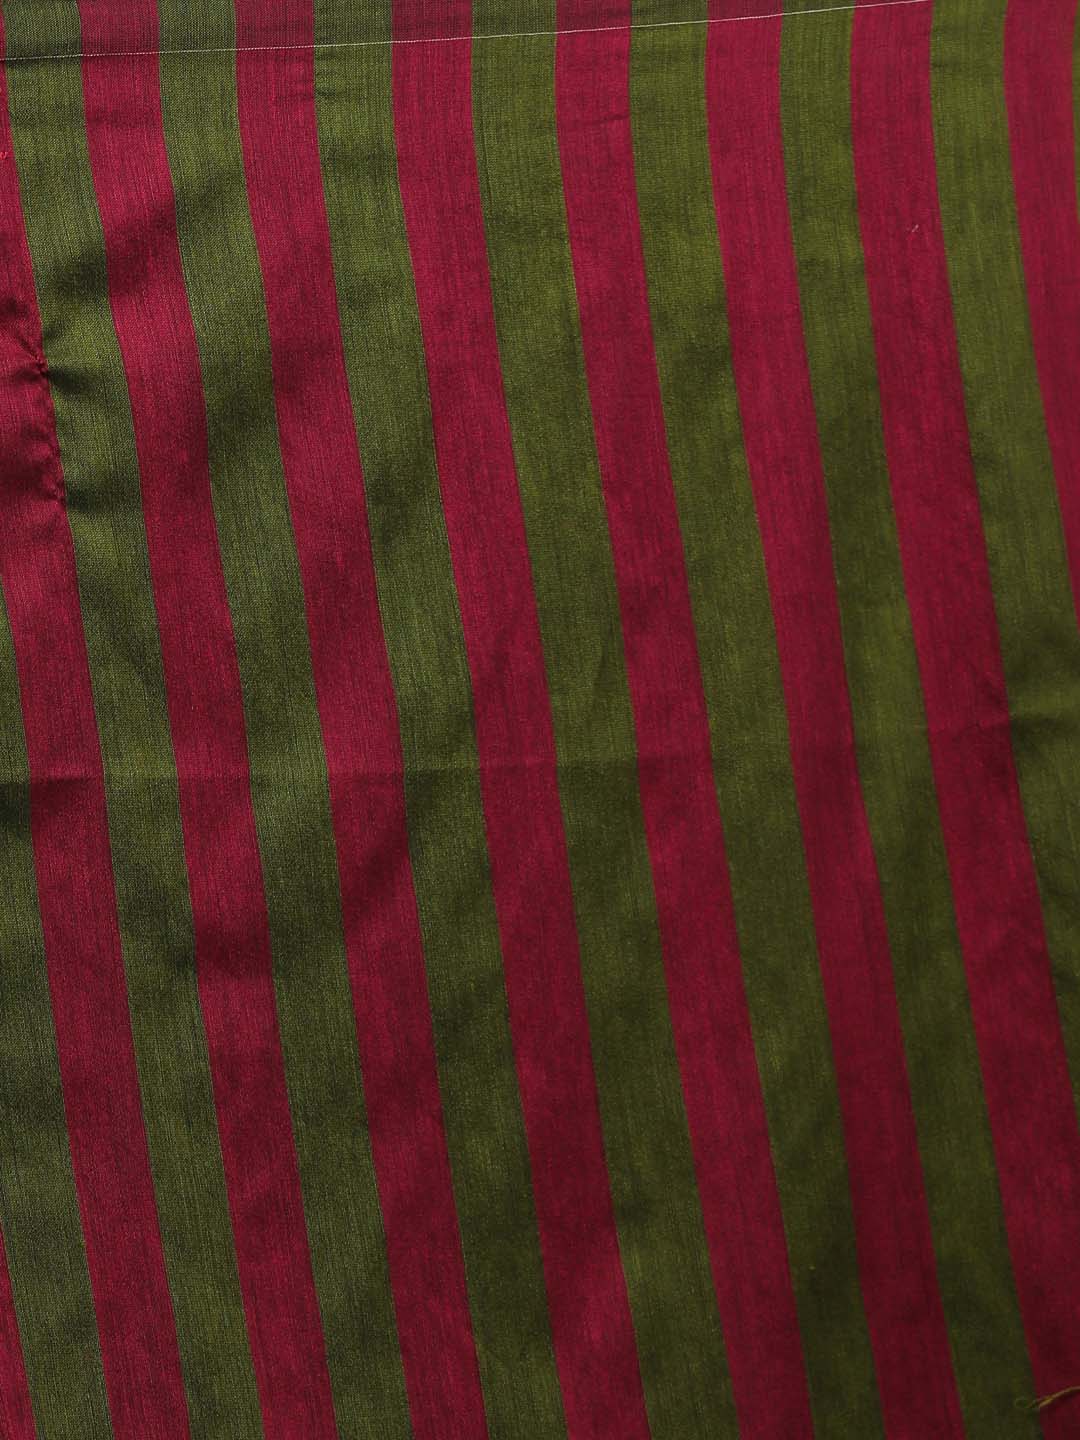 Indethnic Green Saree with Pink Striped Pleats and Pallu - Saree Detail View